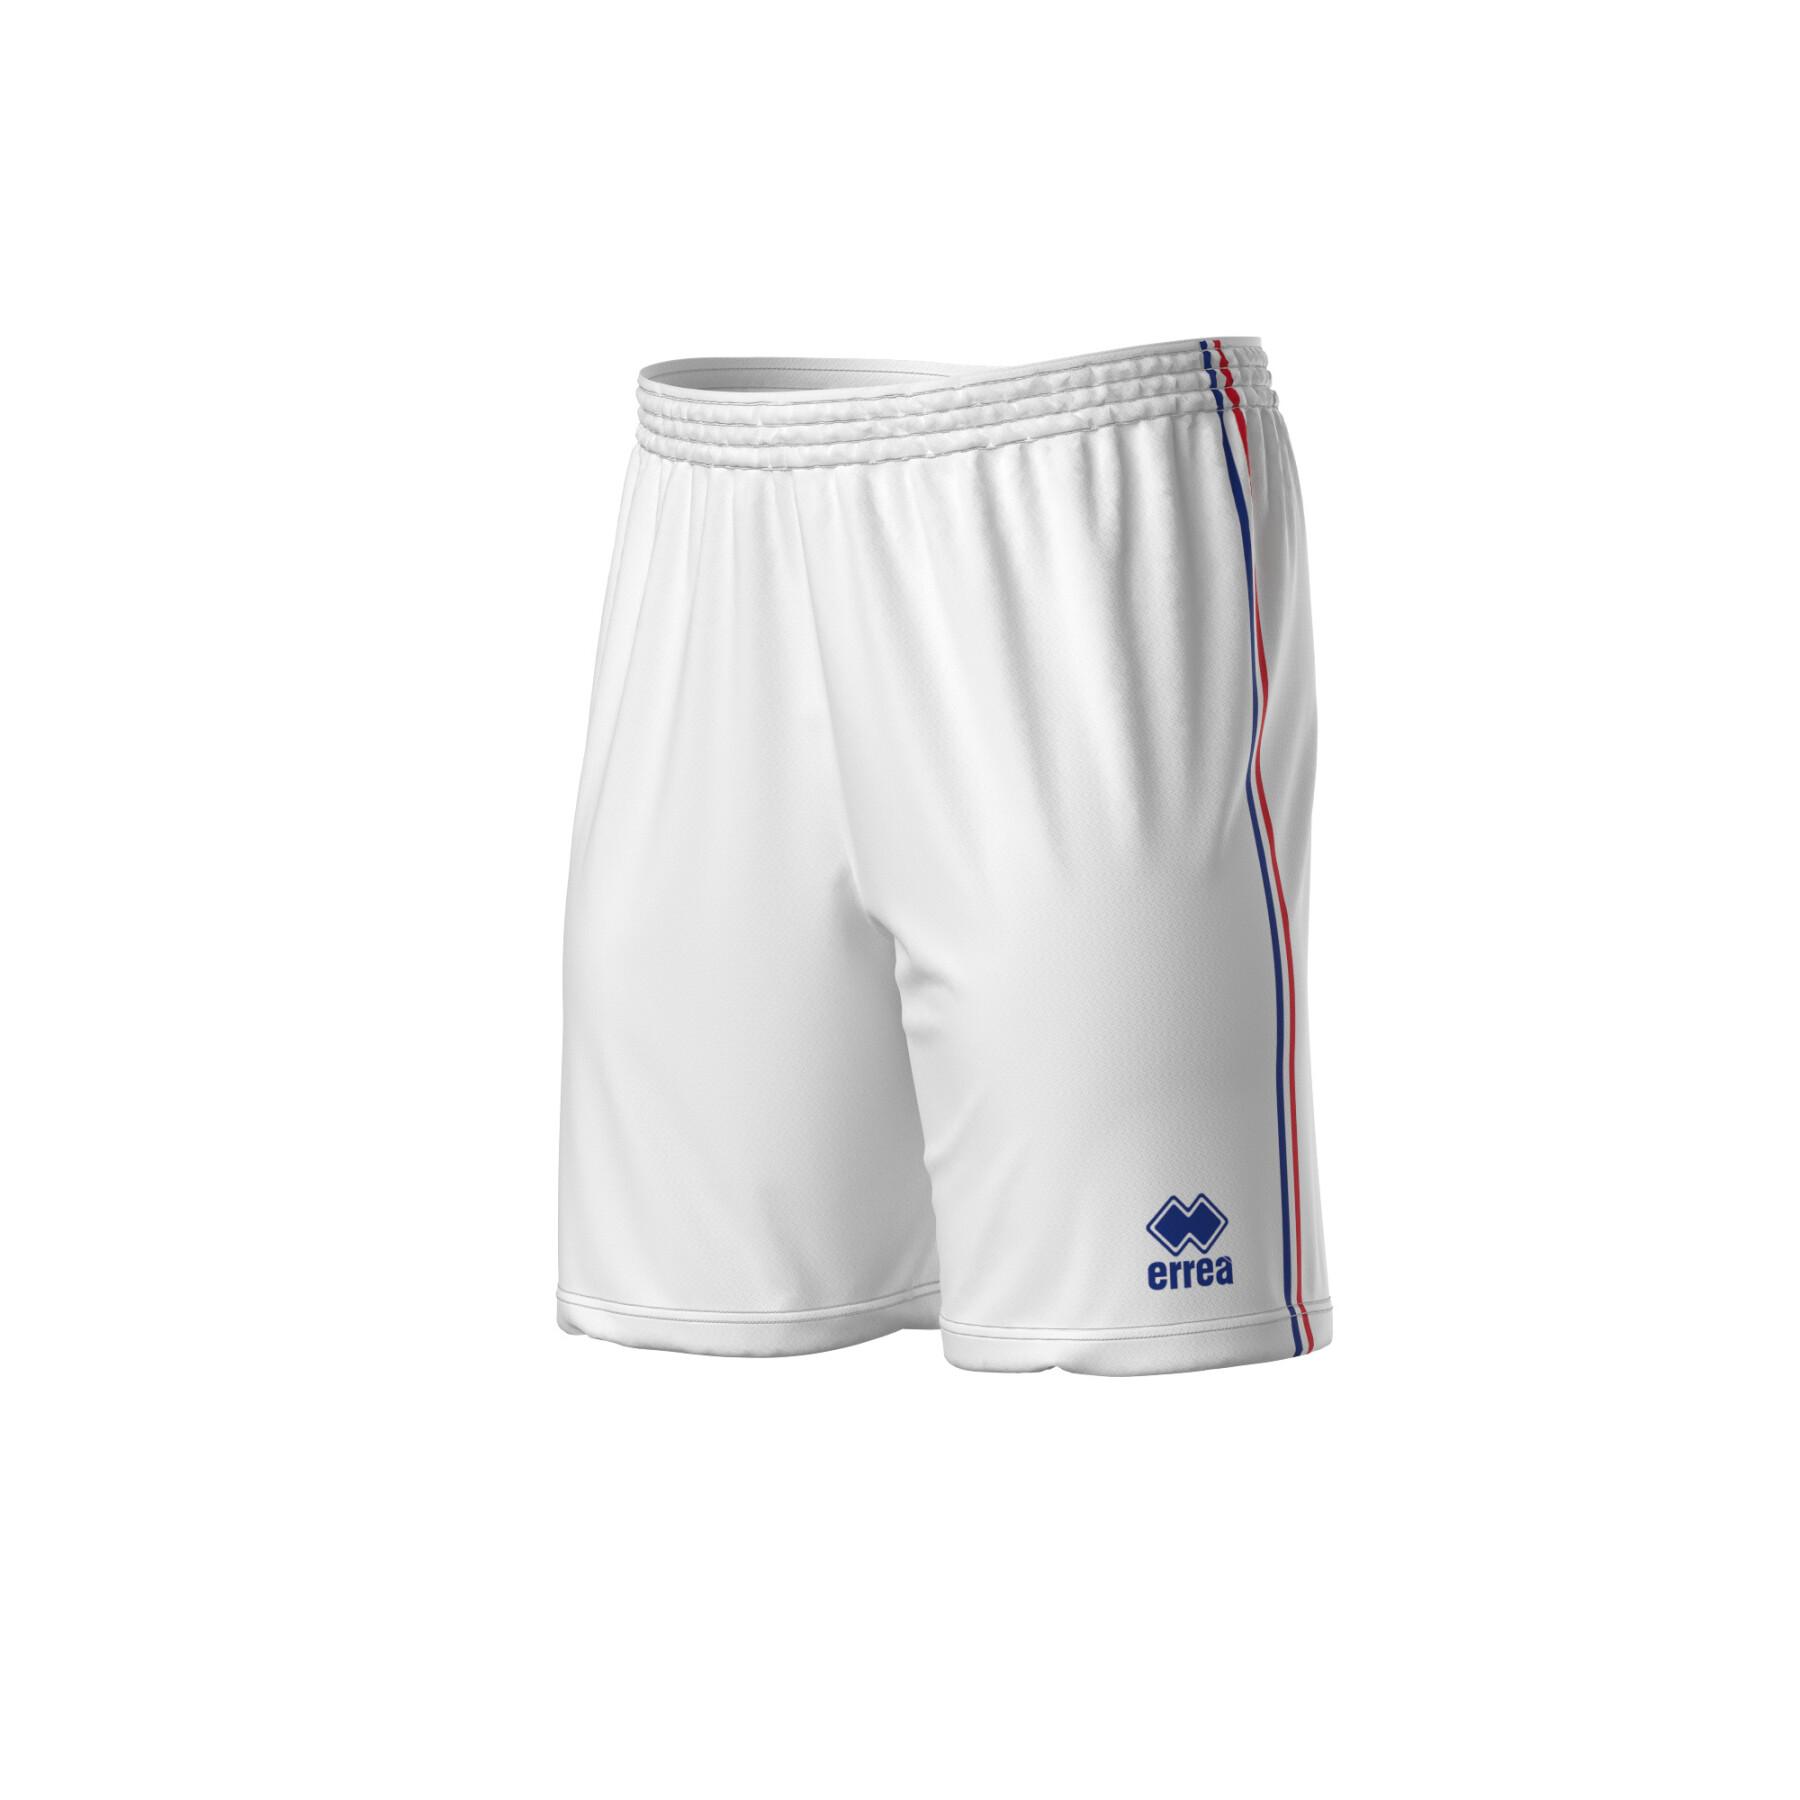 Outdoor shorts France 2022